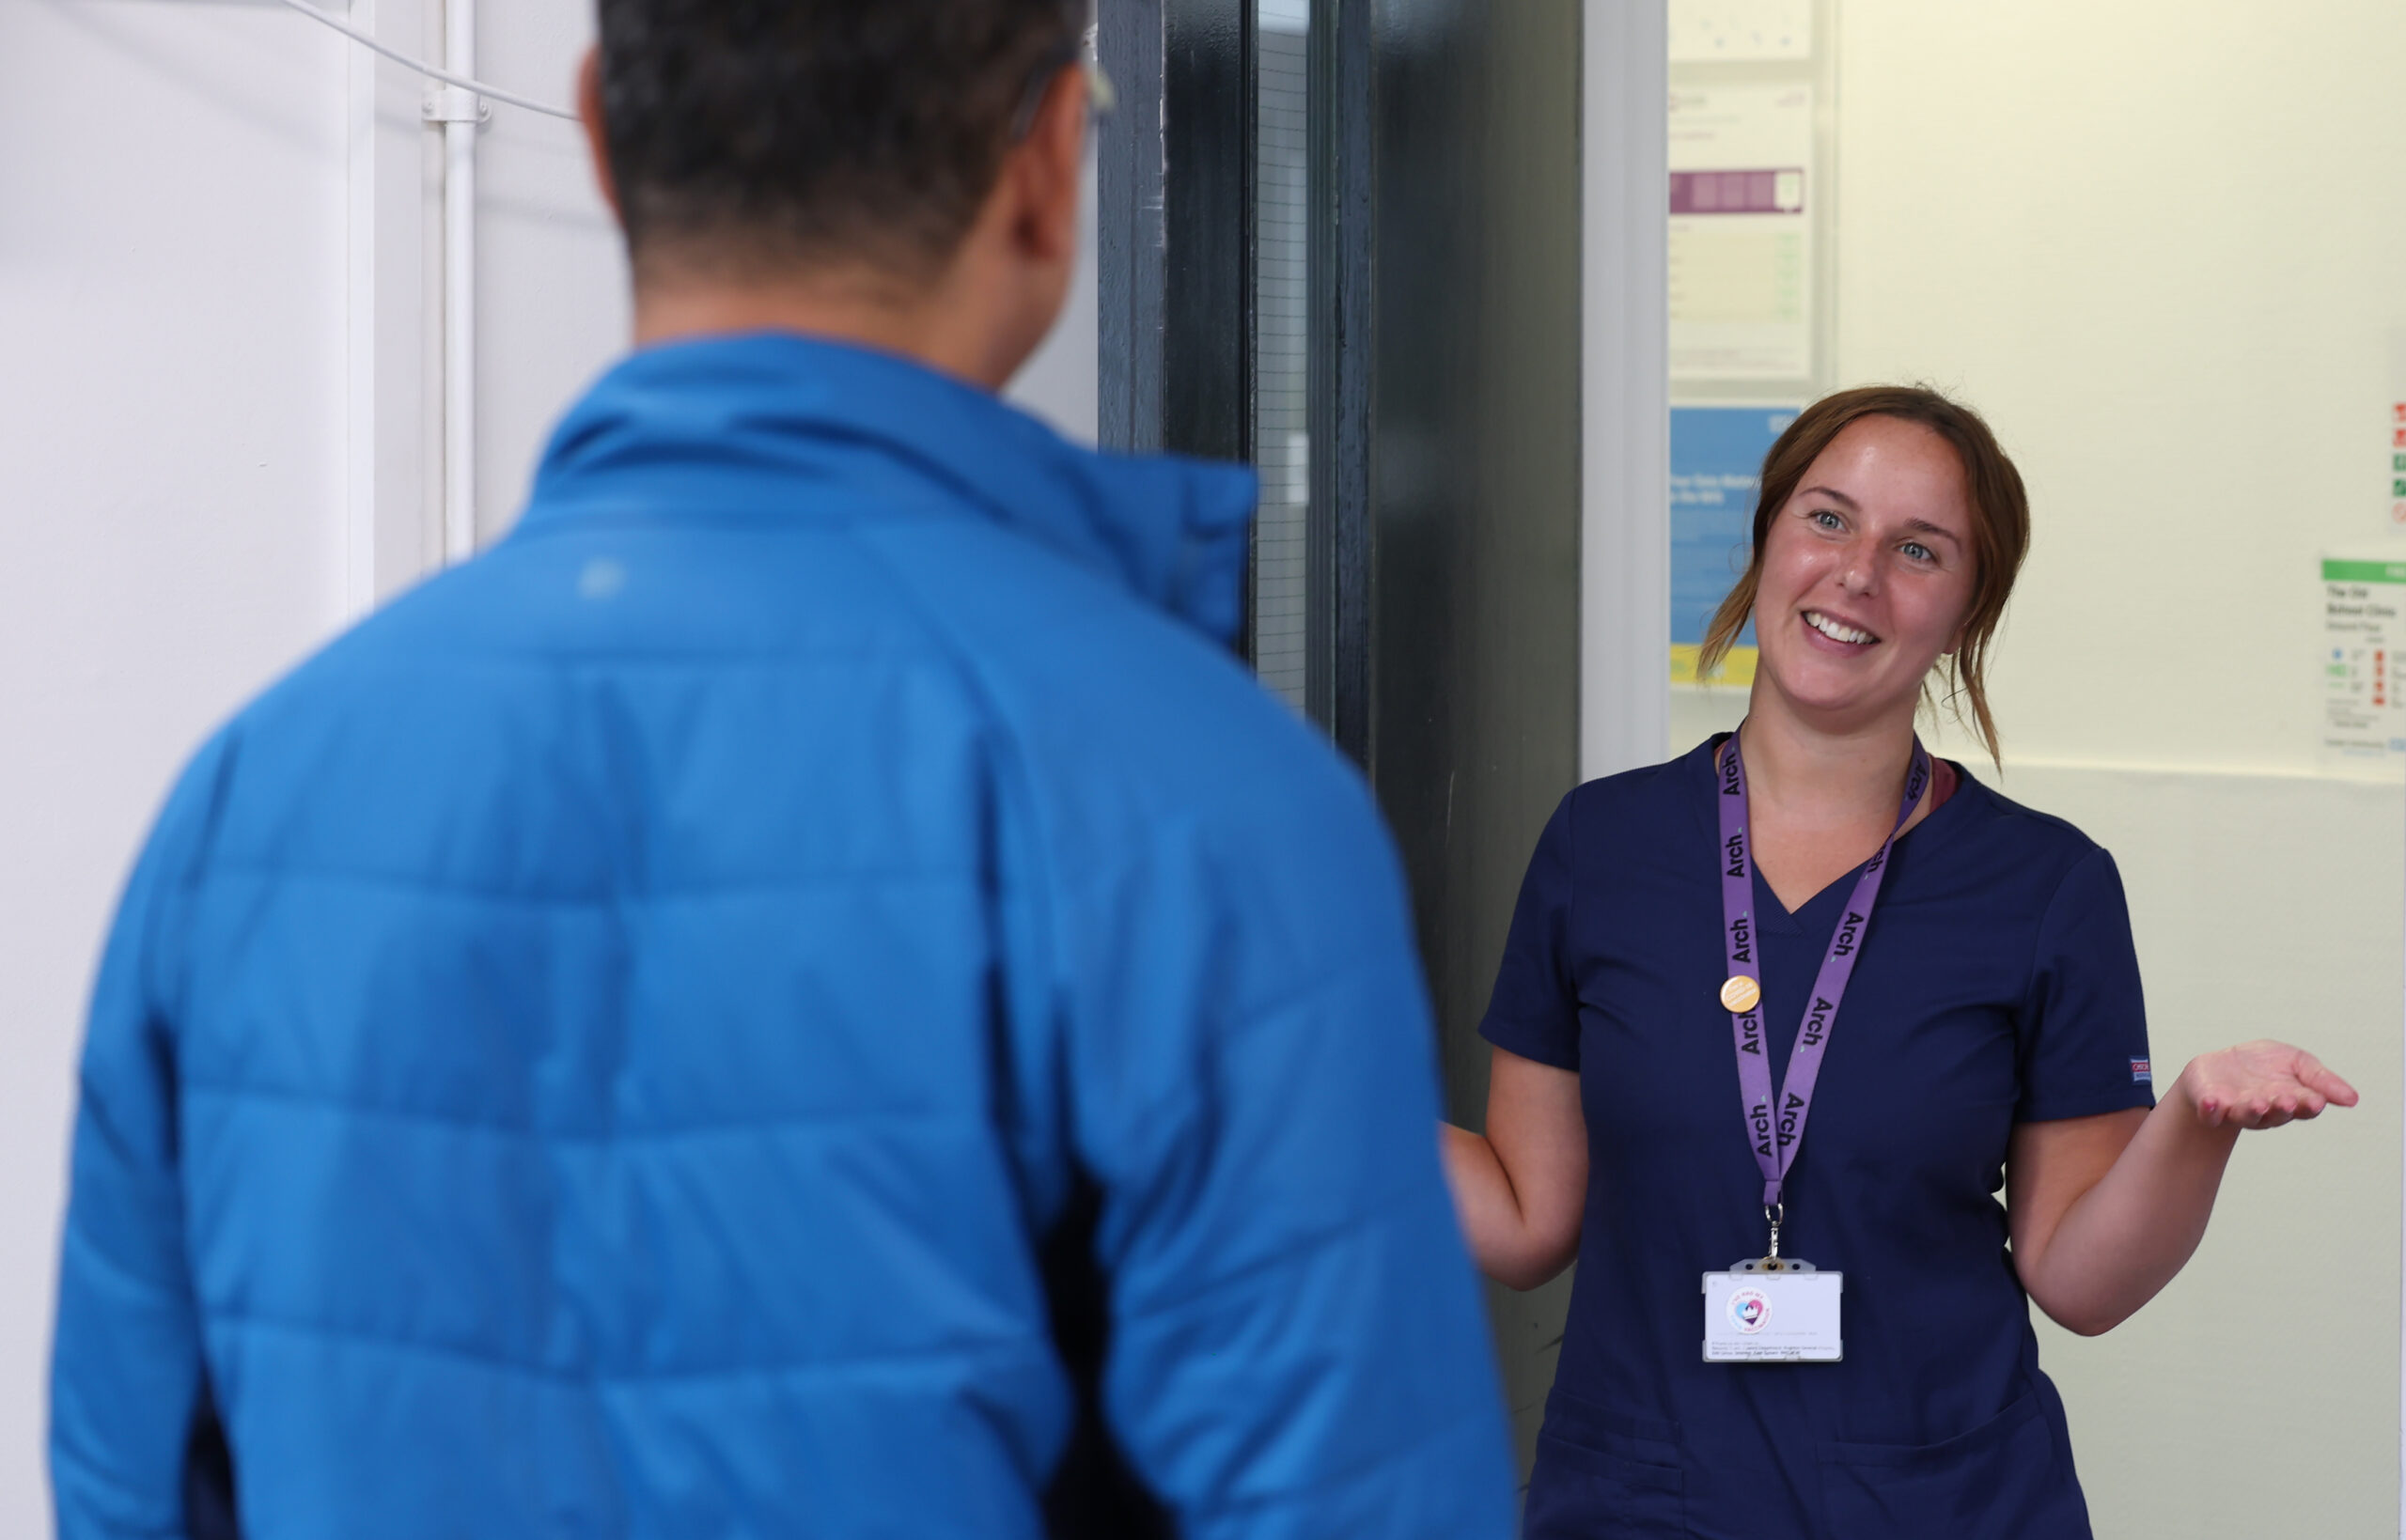 Arch nurse welcoming a patient from a door way, smiling